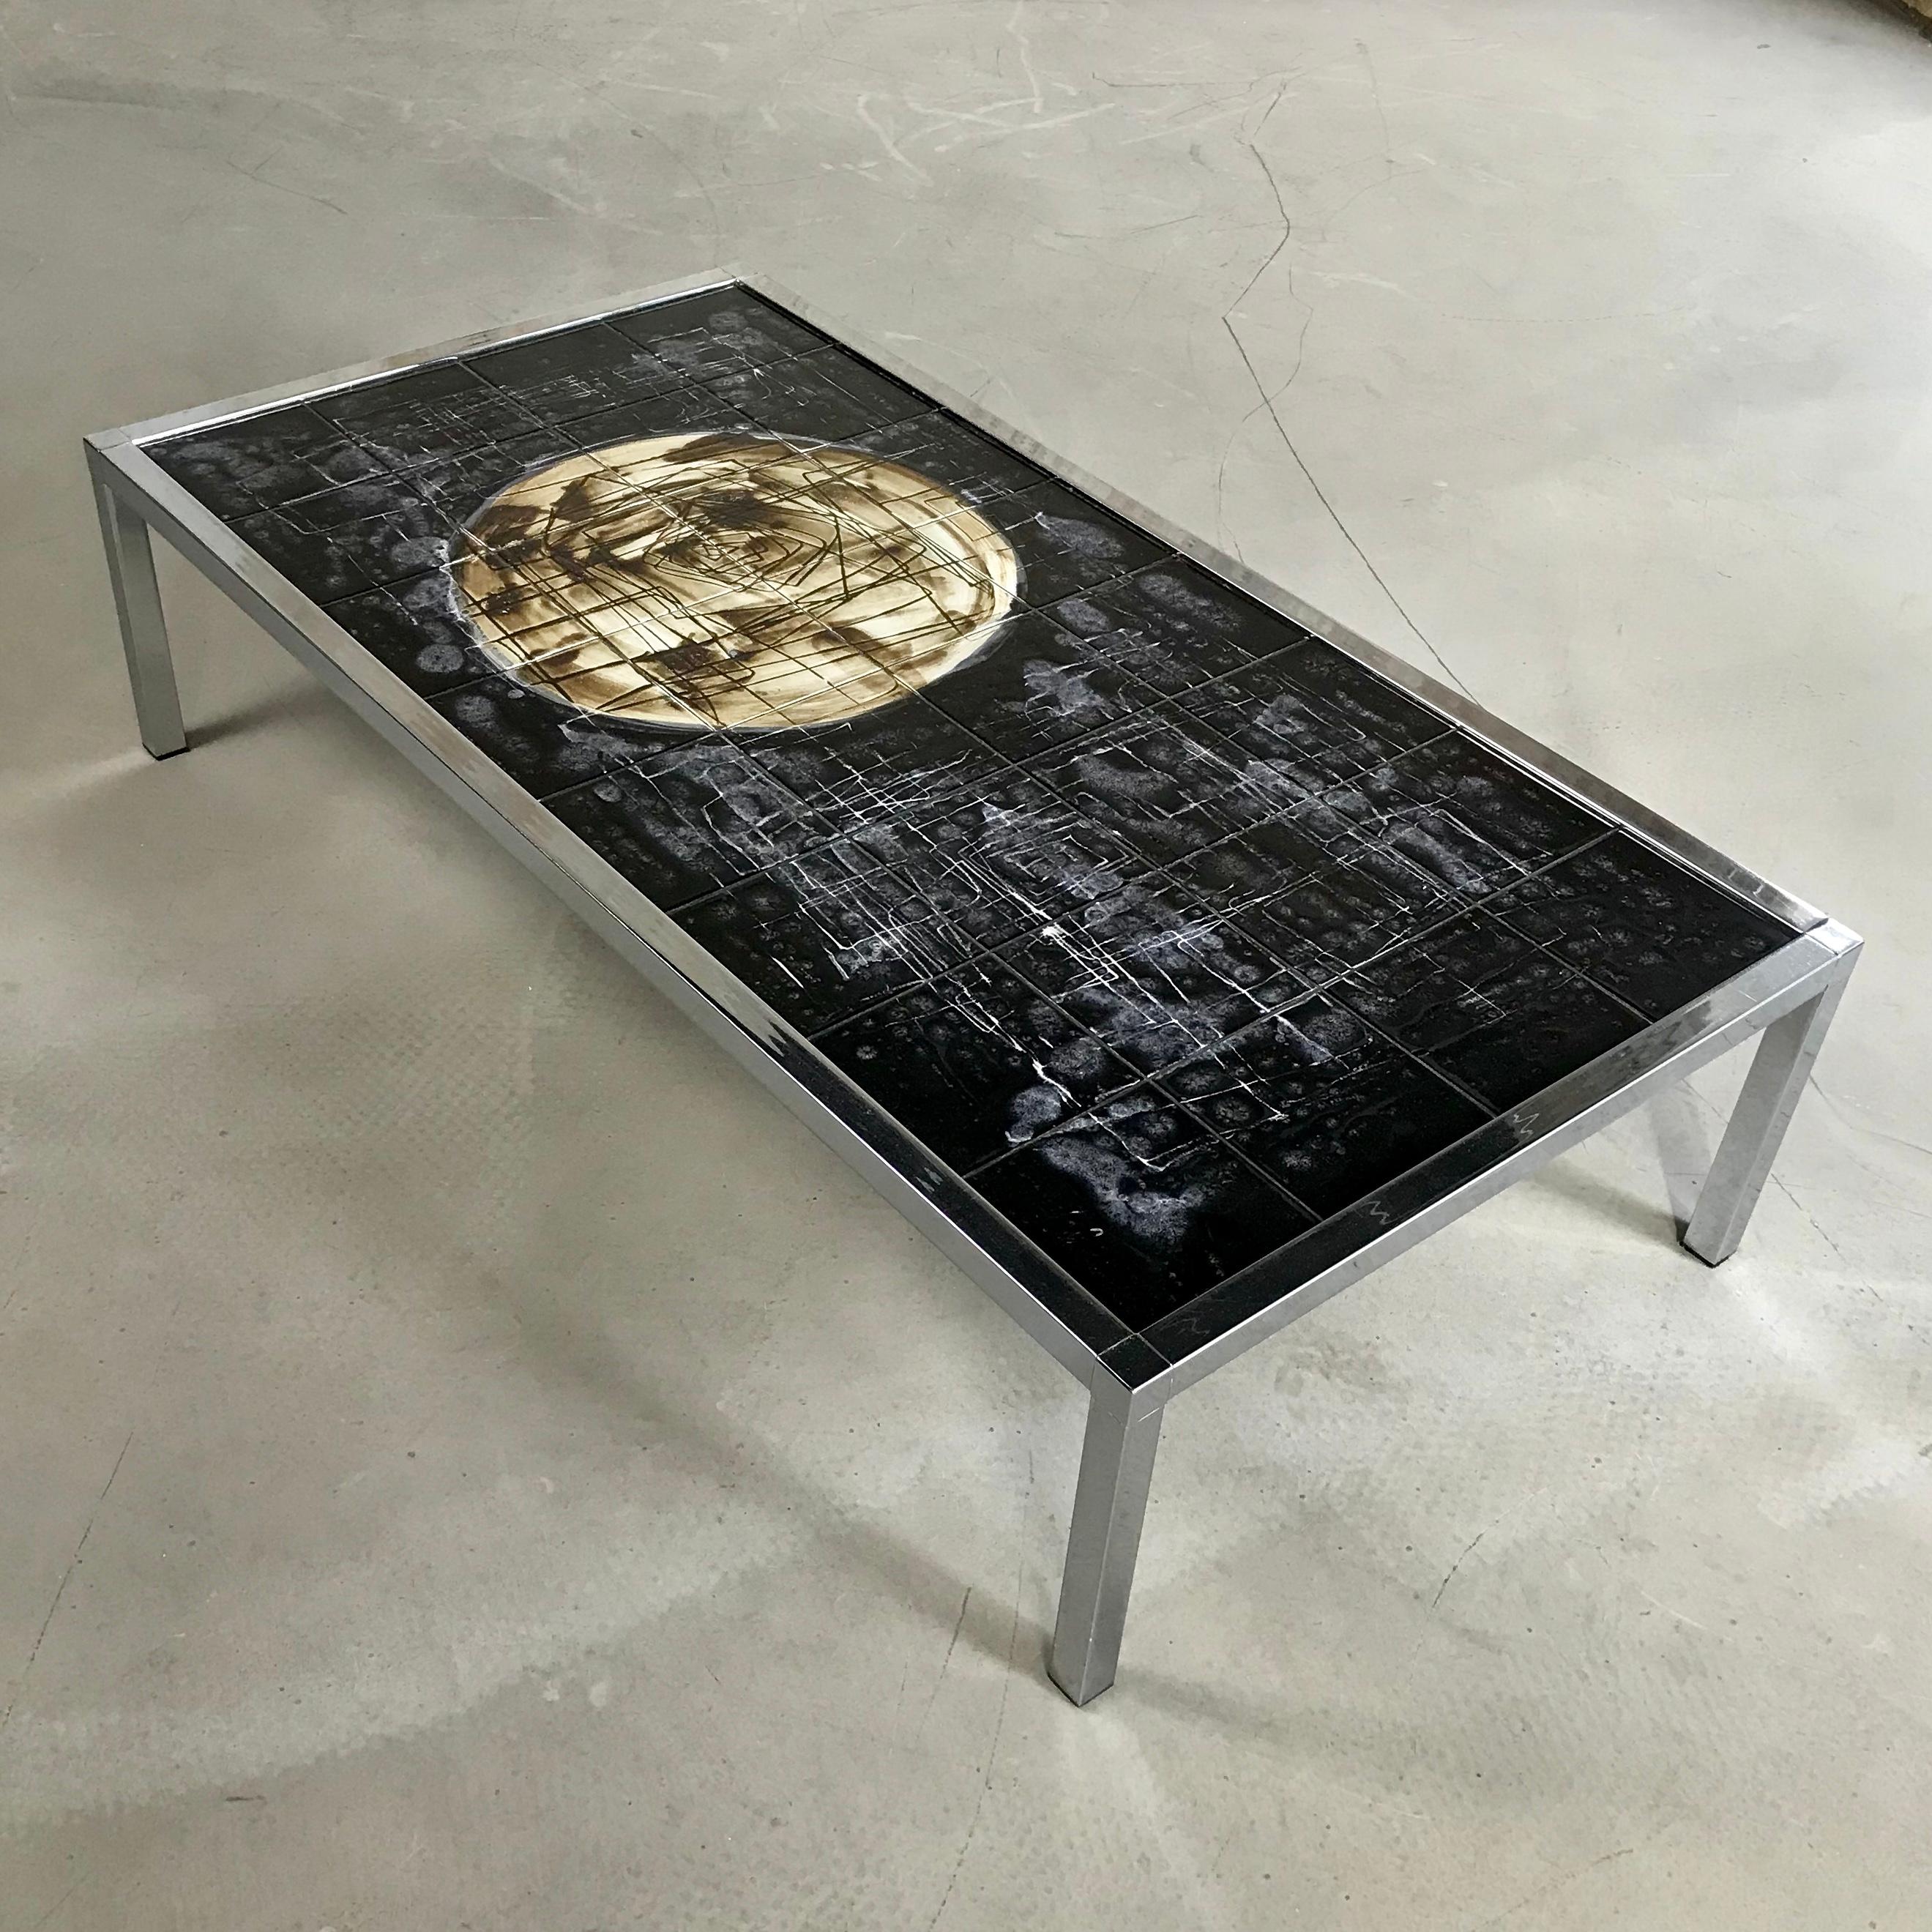 1960s Juliette Belarti large midcentury coffee or side table featuring handmade ceramic tiles supported by a chrome frame. The table makes a strong statement and is a guaranteed conversation piece.

Belgium ceramic artist Juliette Belarti (a pun